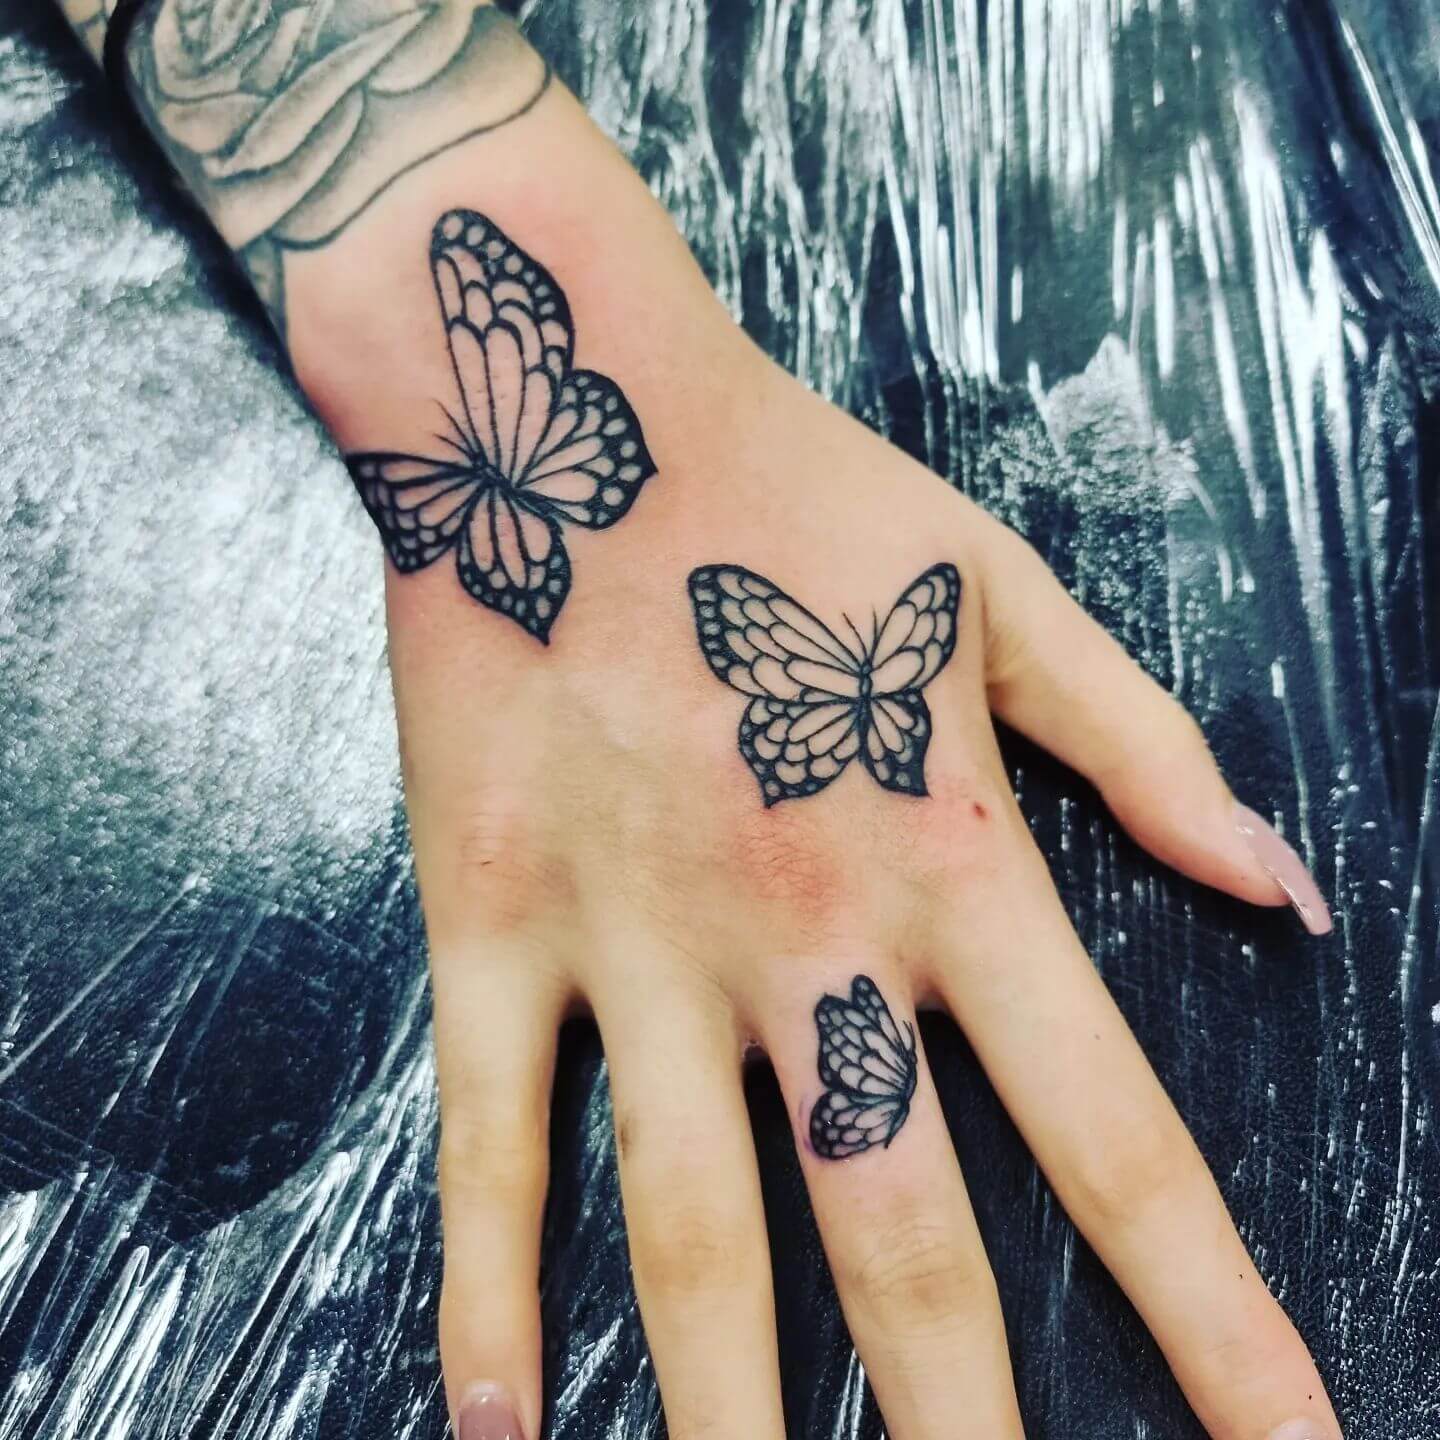 Simple butterfly hand tattoo